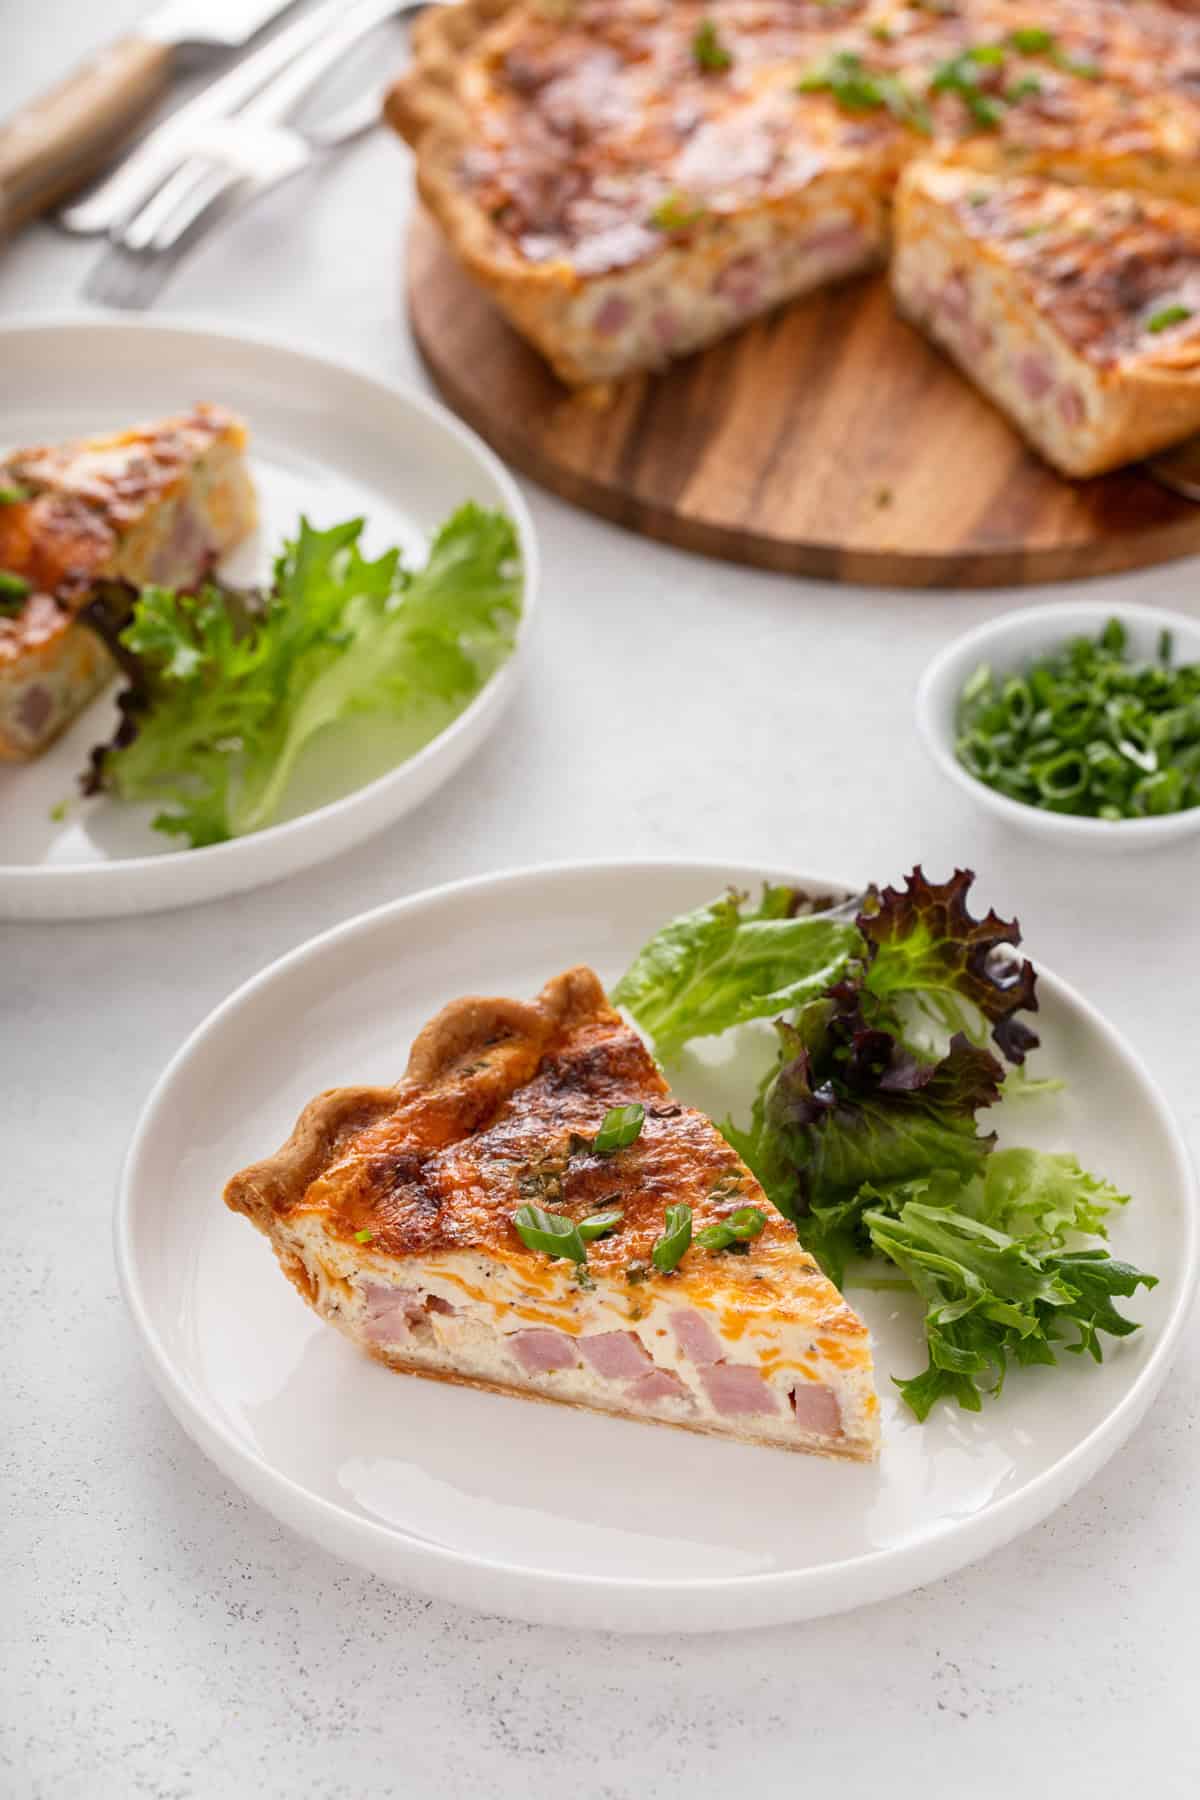 Two white plates, each holding a slice of easy quiche next to salad greens.